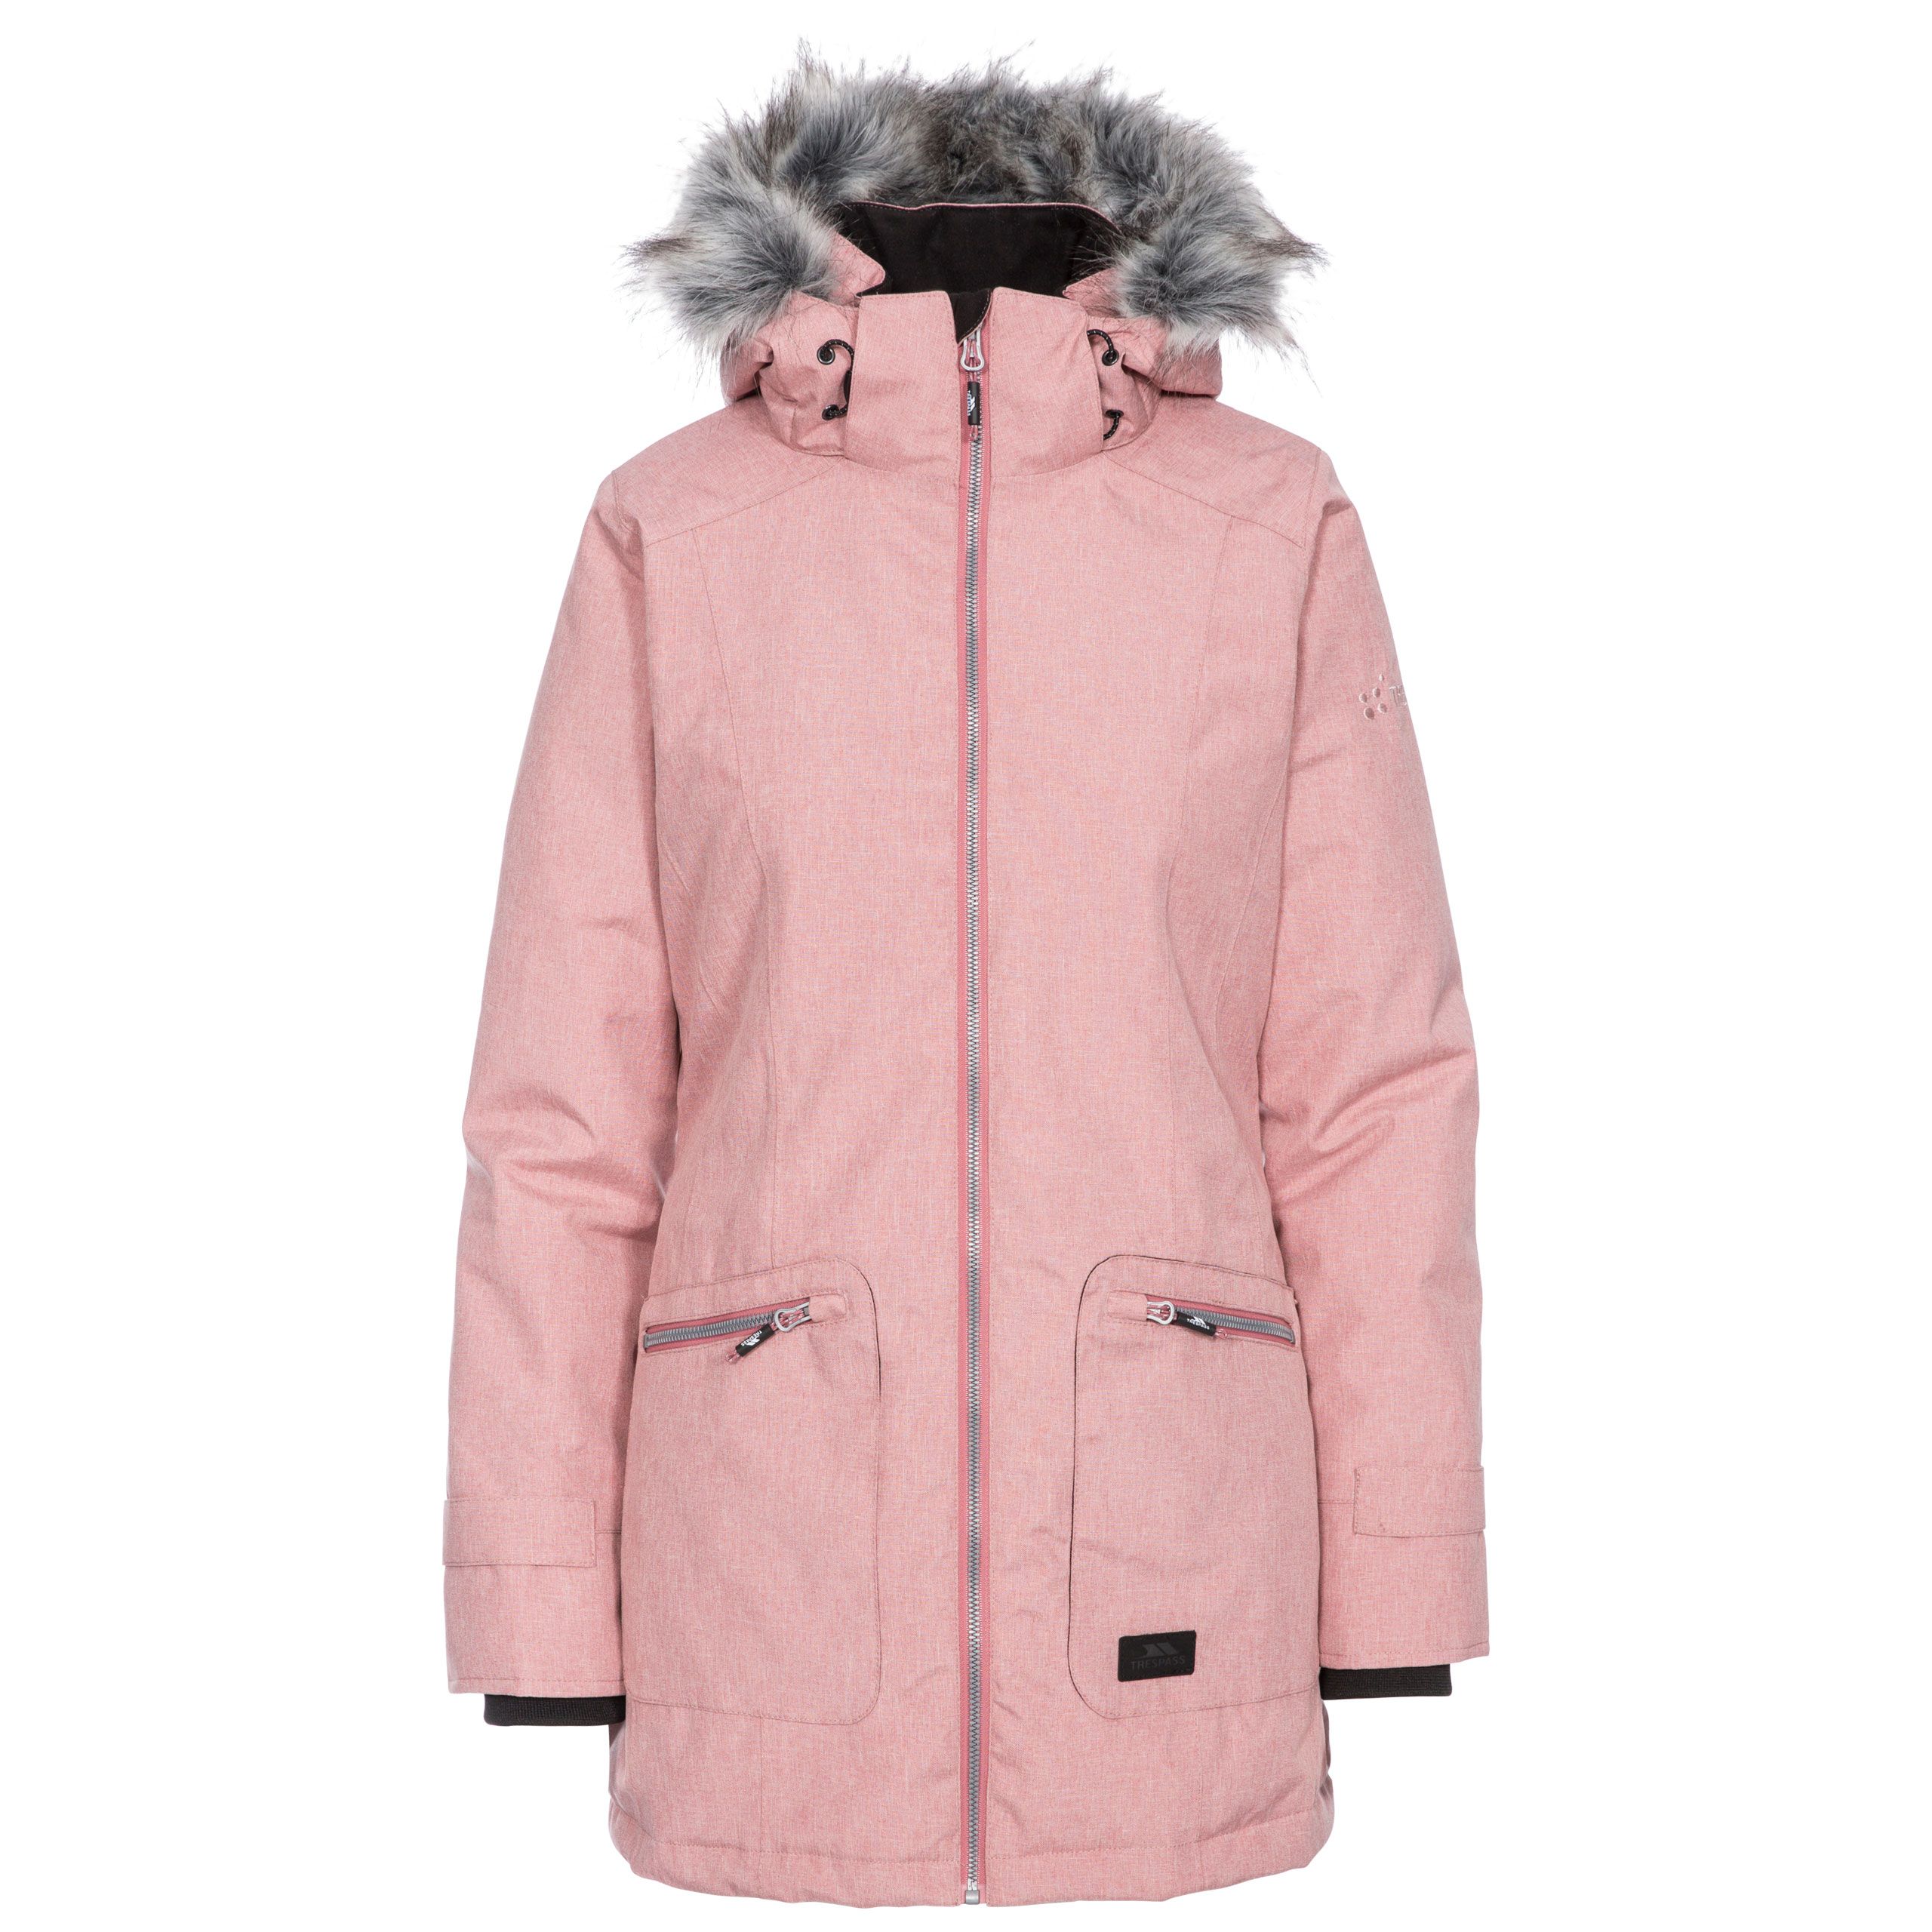 Day By Day Womens Waterproof Parka Jacket